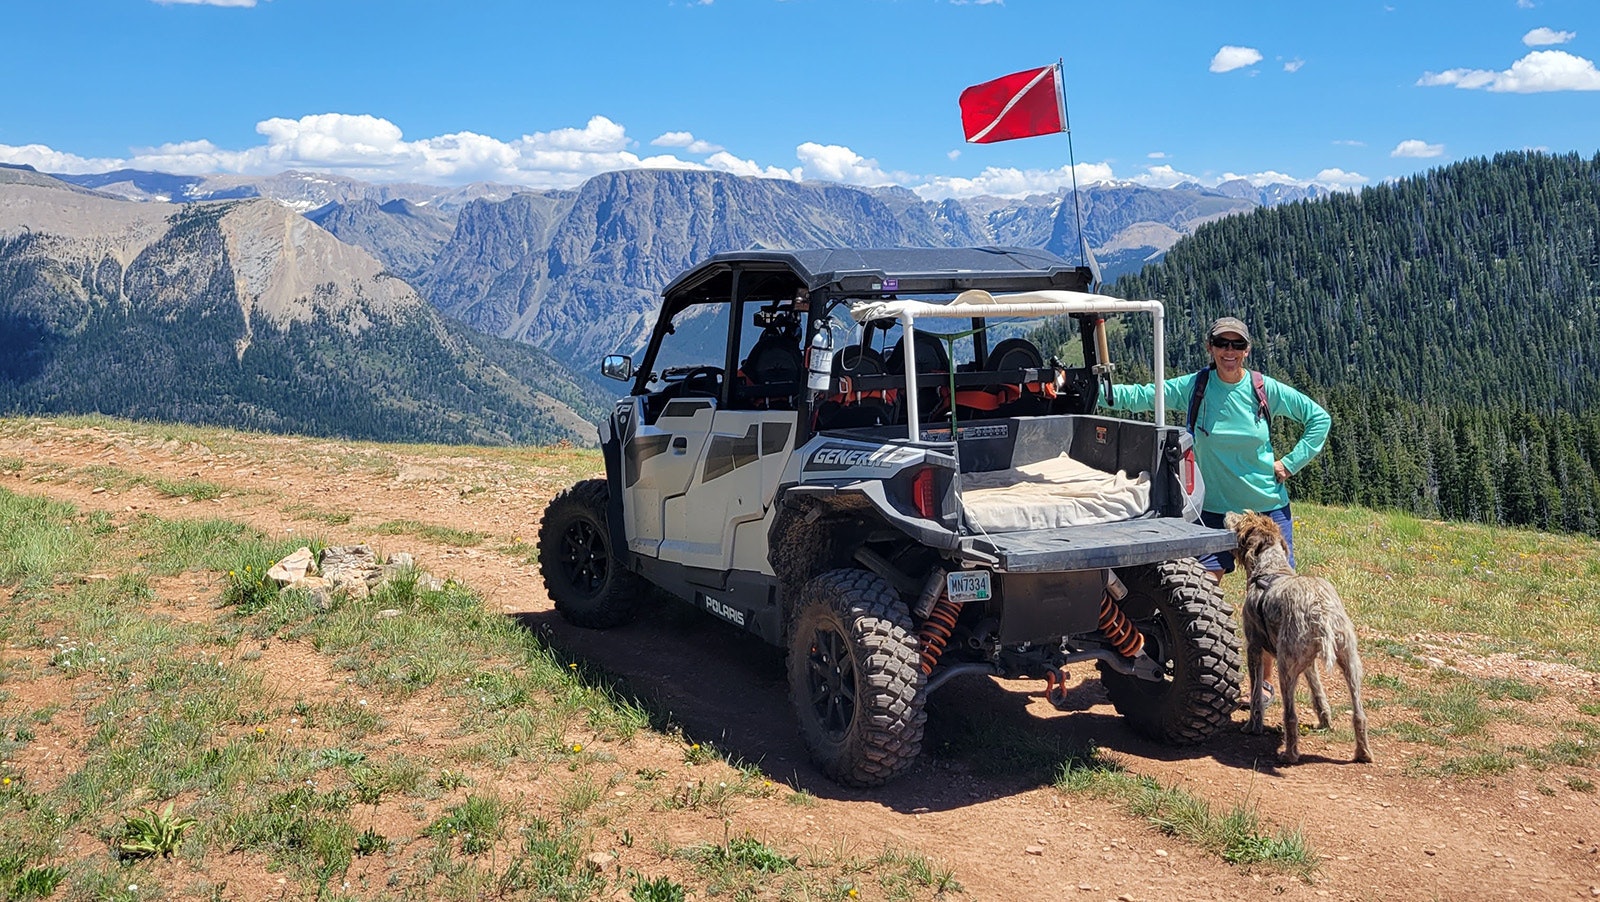 Ken and Trish Draze of Pinedale like to tour public lands all over the West in their side-by-side. They’re worried that the Bureau of Land Management might close roads and trails to motorized use across the region.